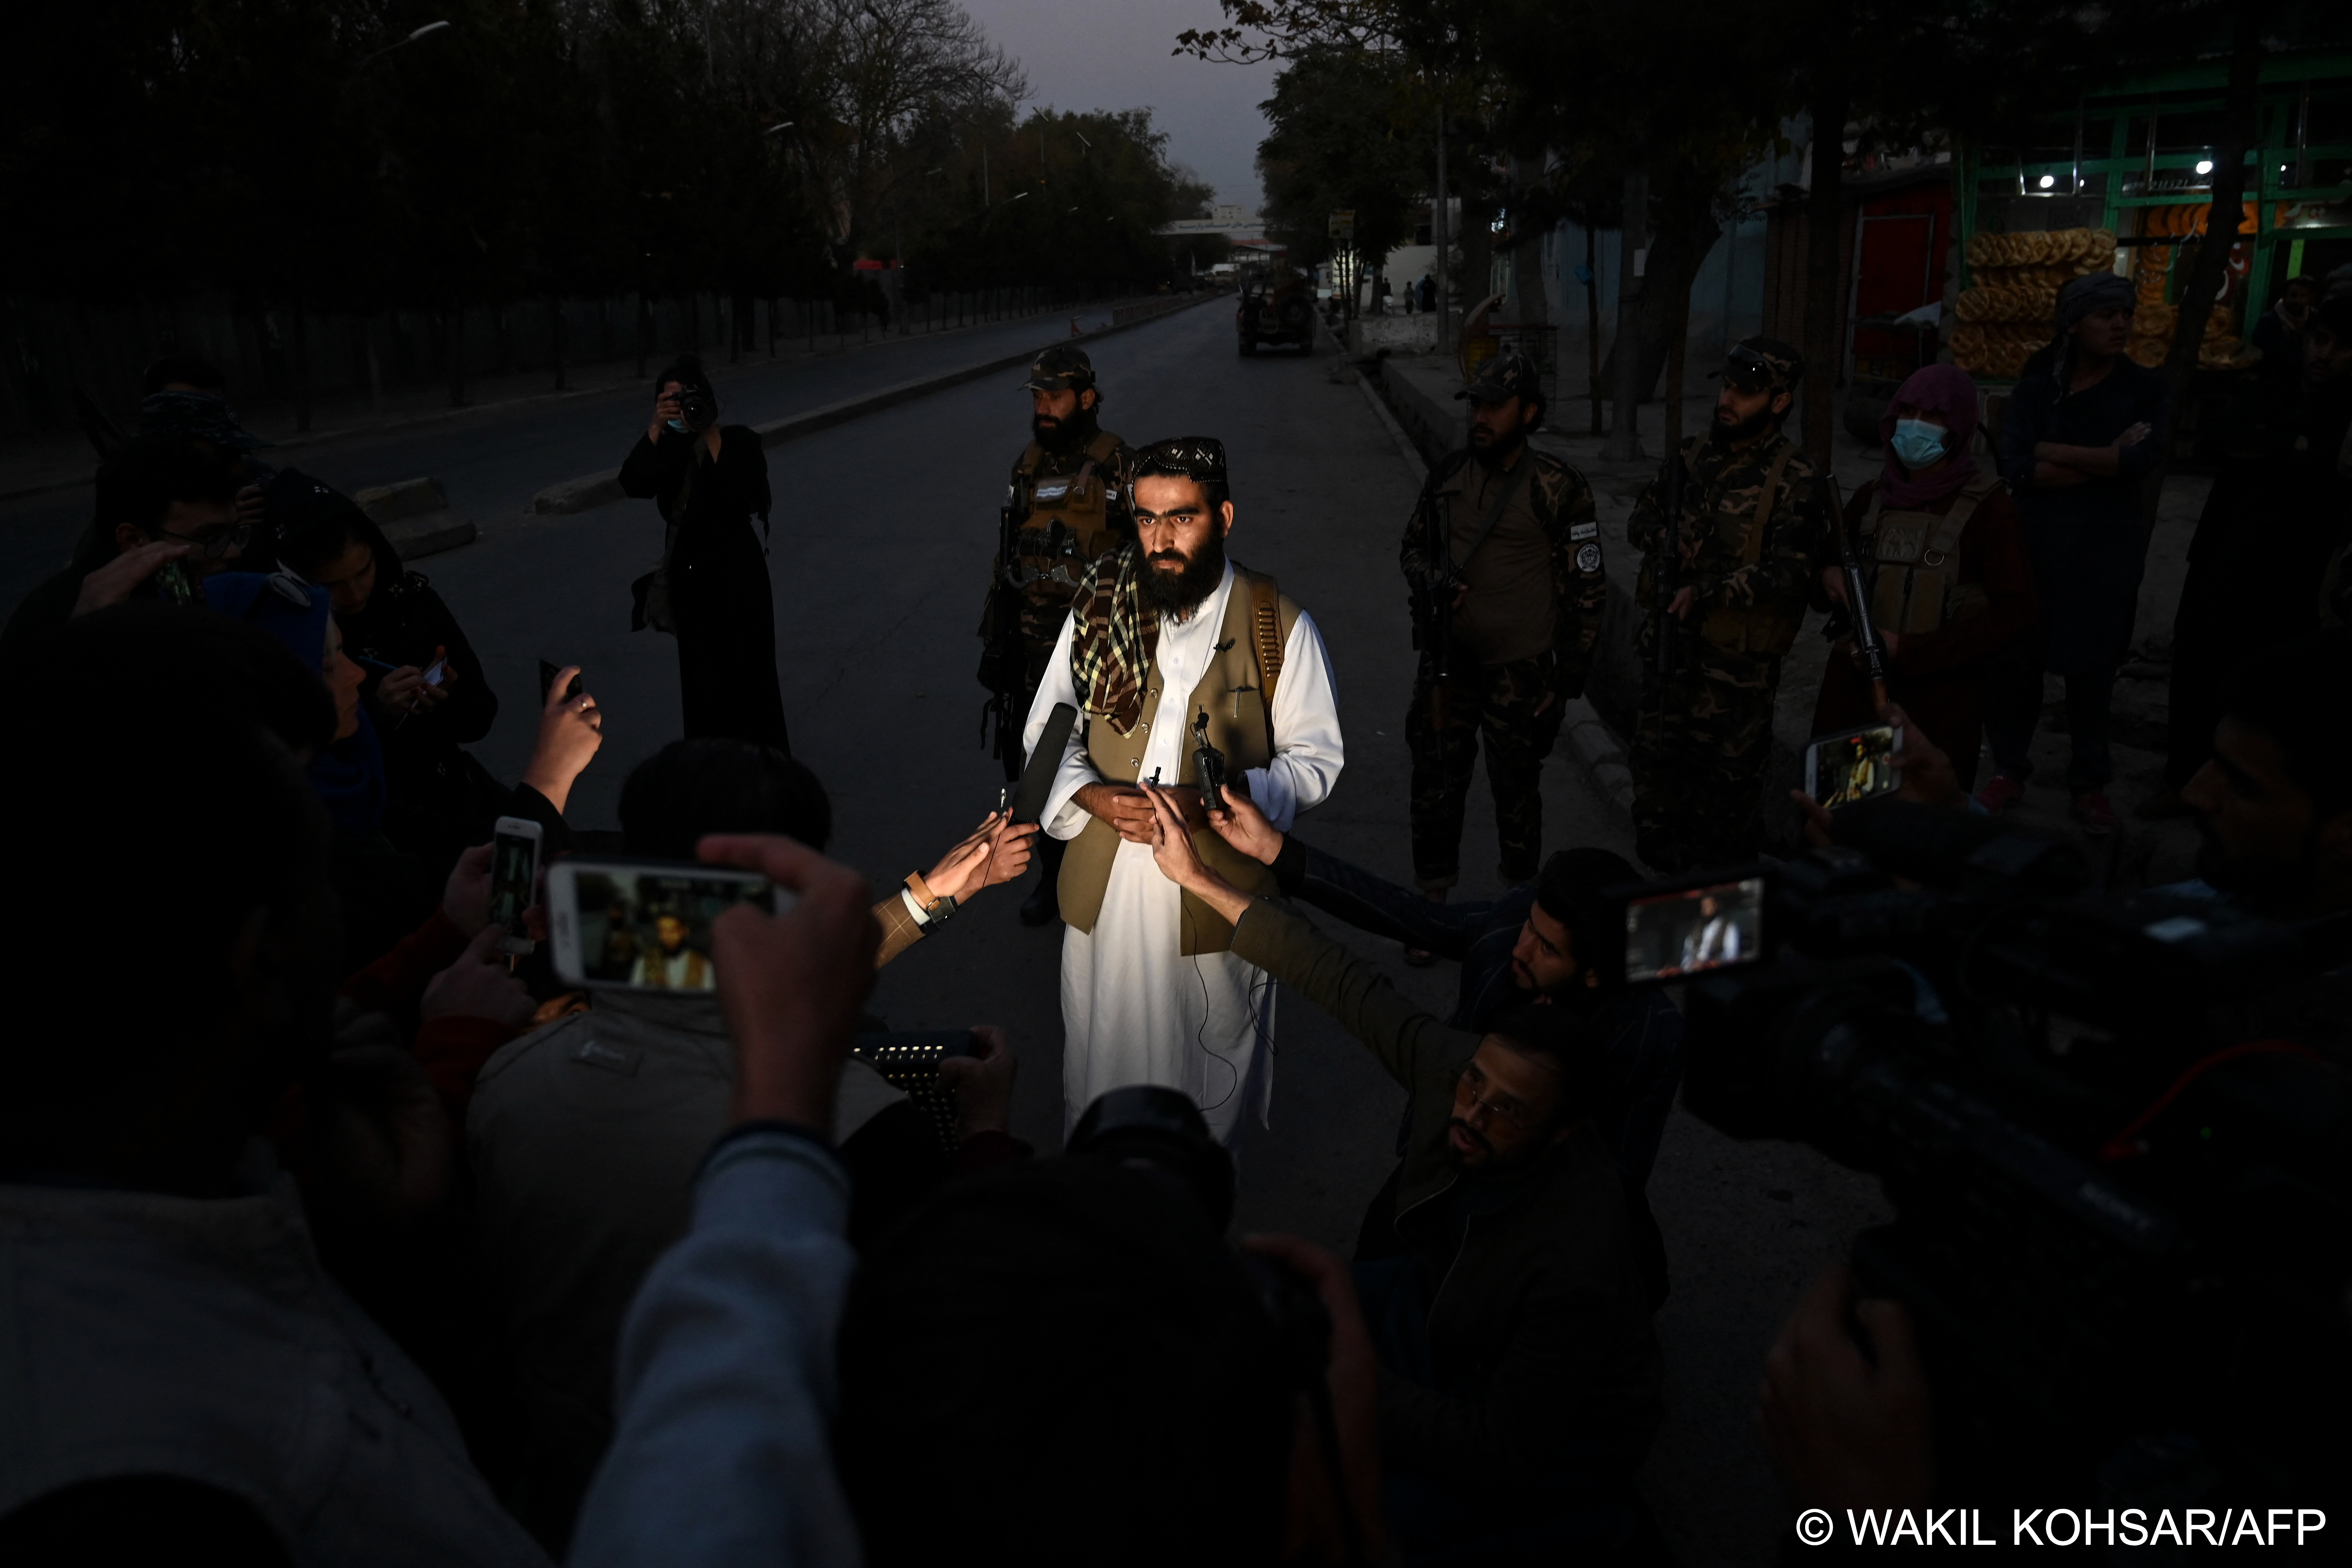 A Taliban official addresses journalists after Tuesday's deadly assault on a military hospital in Kabul (photo: Wakil Kohsar/AFP)